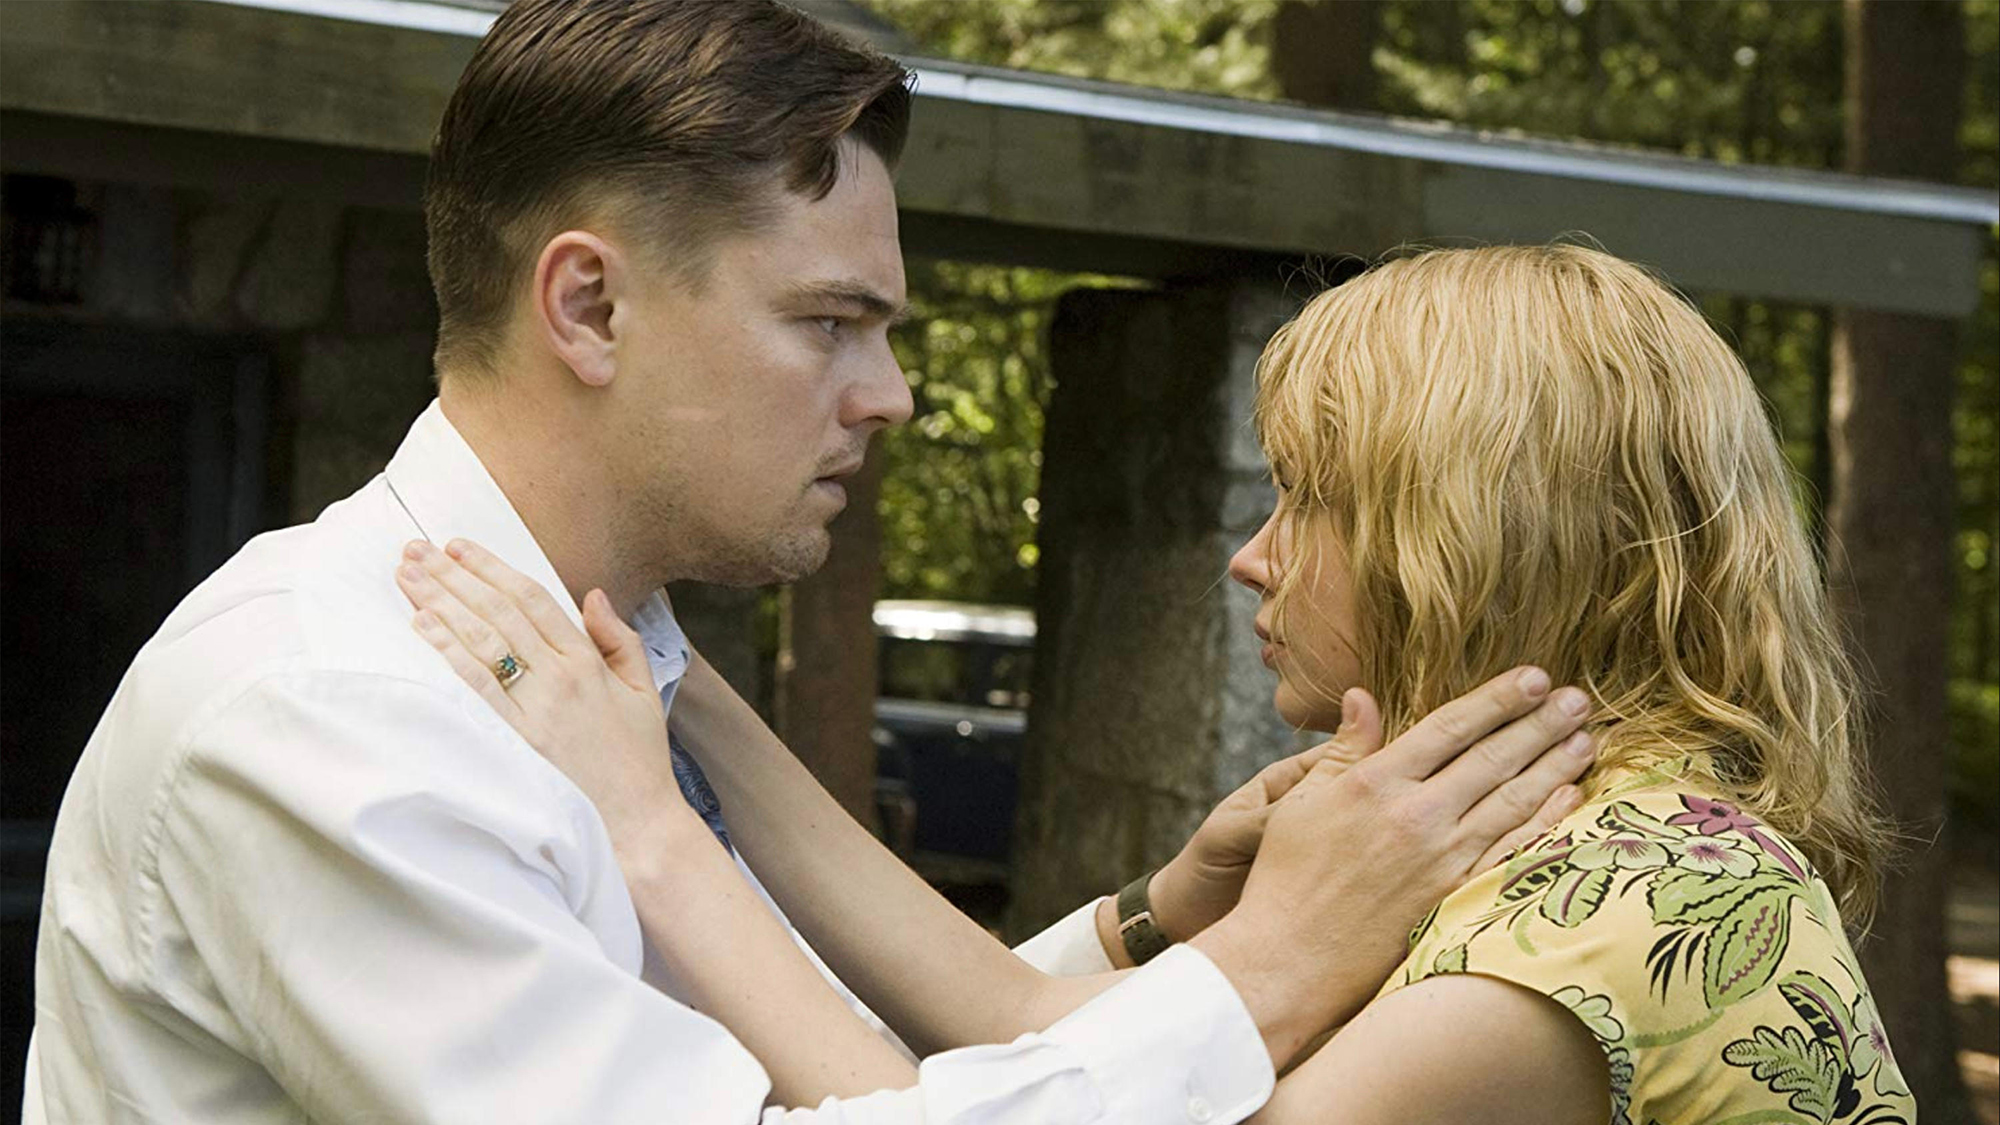 (L, R) Leonardo DiCaprio (as Teddy) and Michelle Williams (as Dolores) standing at Shutter Island